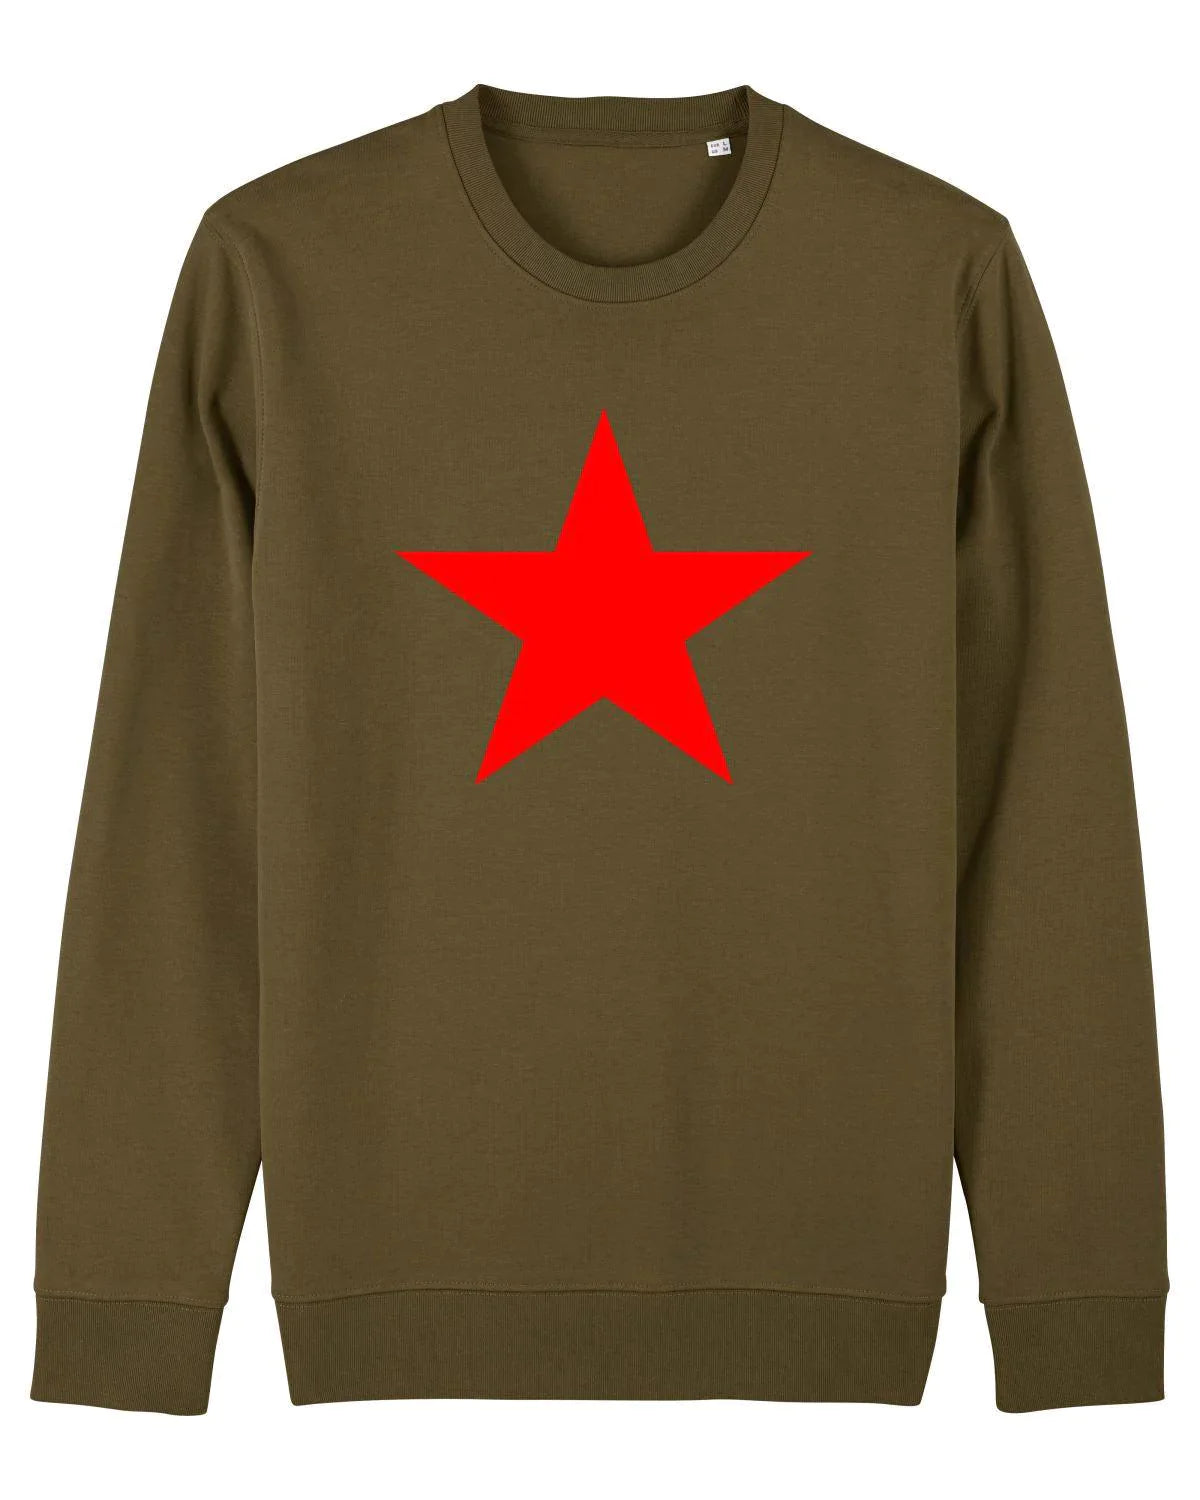 RED STAR: As Worn By Michael Stipe (R.E.M) and Indie Kids. T-Shirt And Sweatshirt - SOUND IS COLOUR